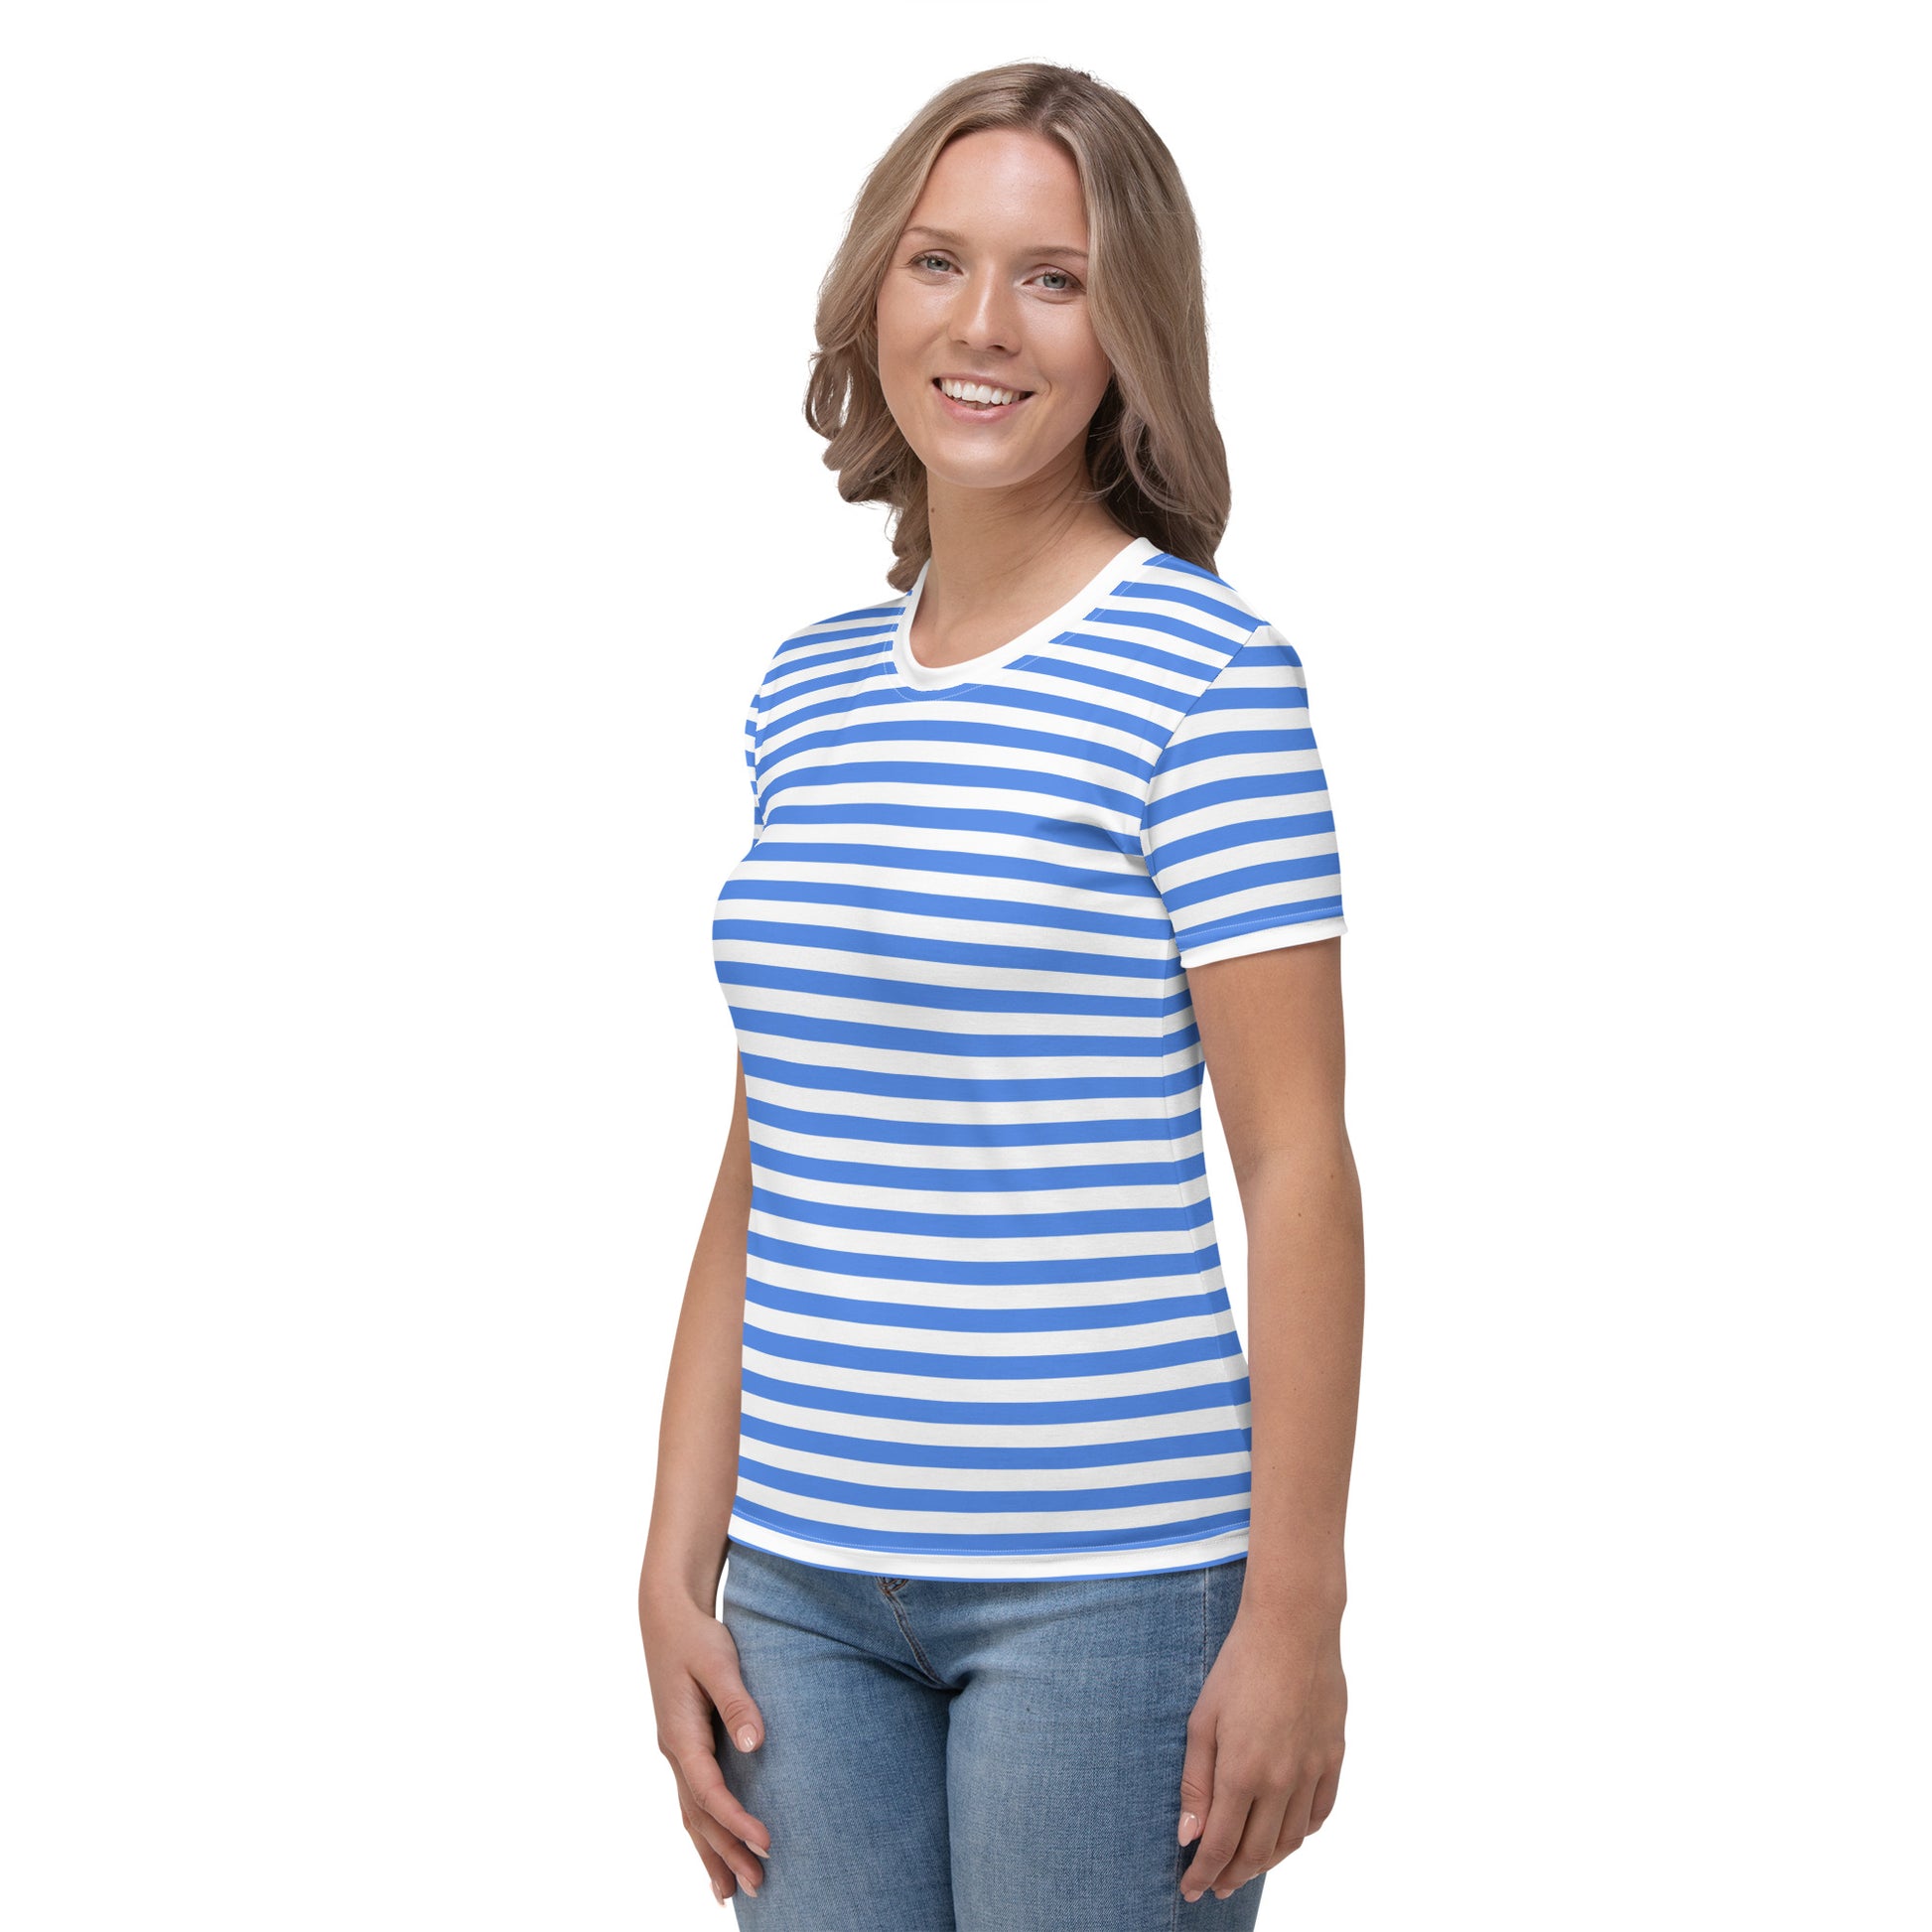 Blue And White Striped Shirt Ladies